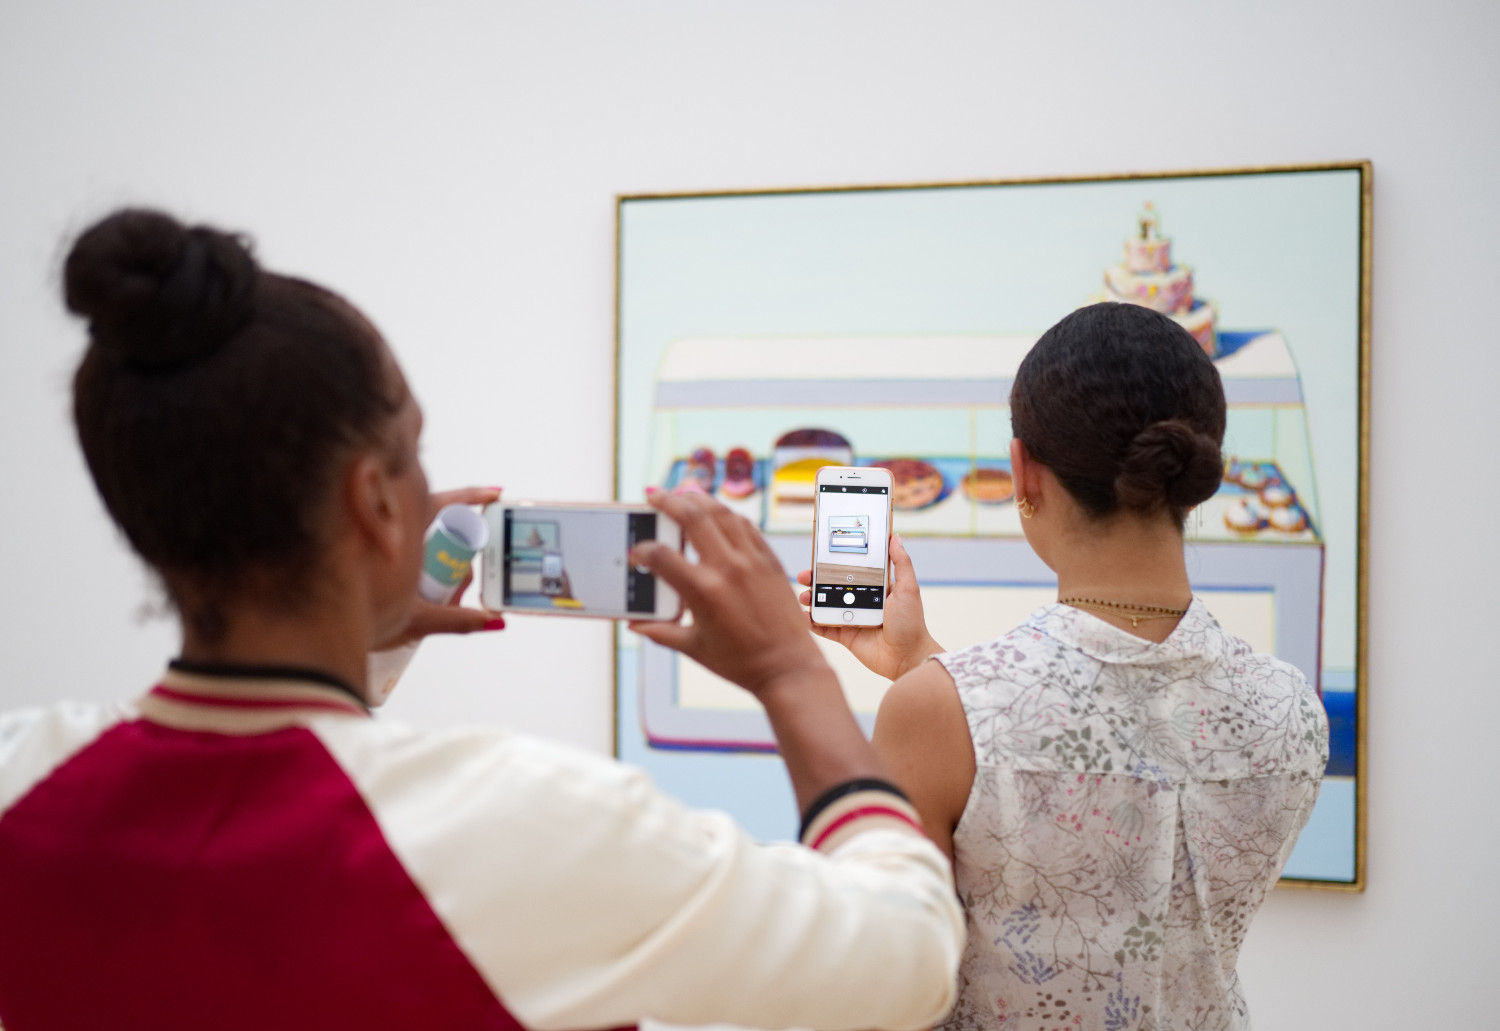 © Image: Christian Fregna Two people have their backs to the camera as they both take a photo of a painting hanging on the wall. The person in the back is taking her photo of the painting through the phone screen of the person of the person standing in front of her.